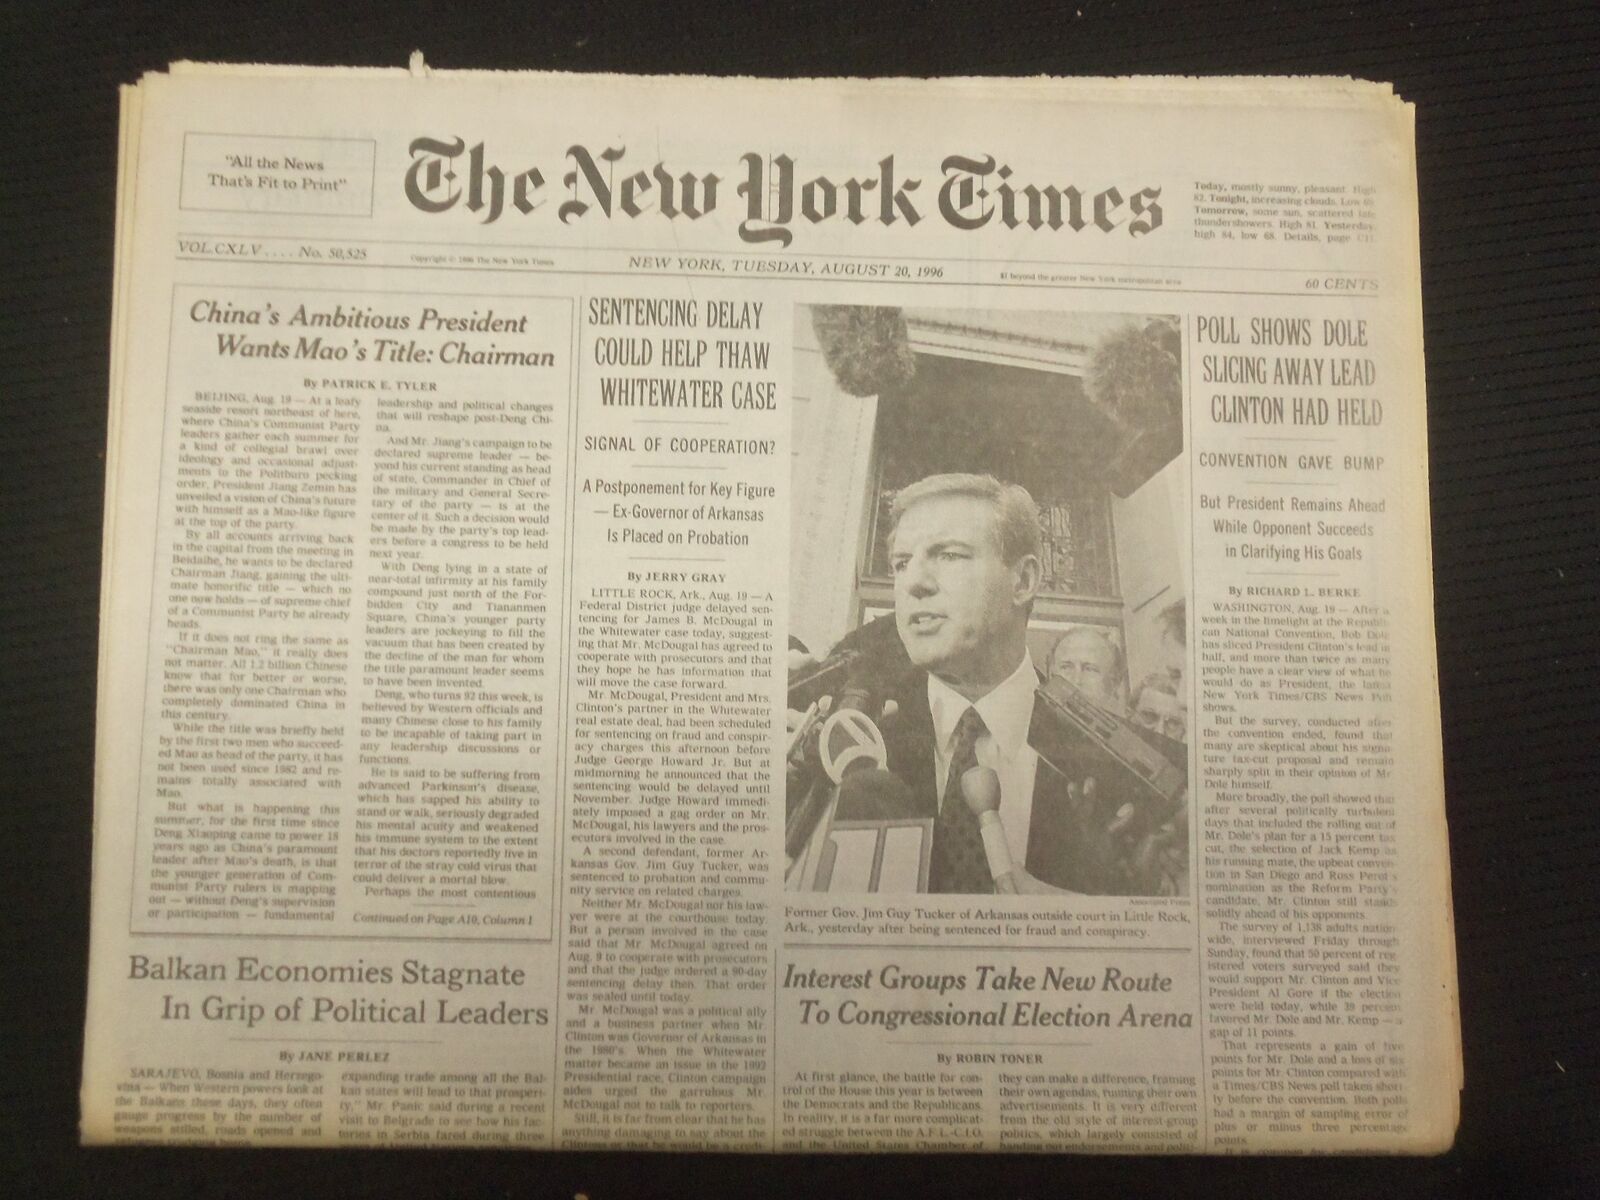 1996 AUG 20 NEW YORK TIMES NEWSPAPER -SENTENCING DELAY THAW WHITEWATER - NP 7031